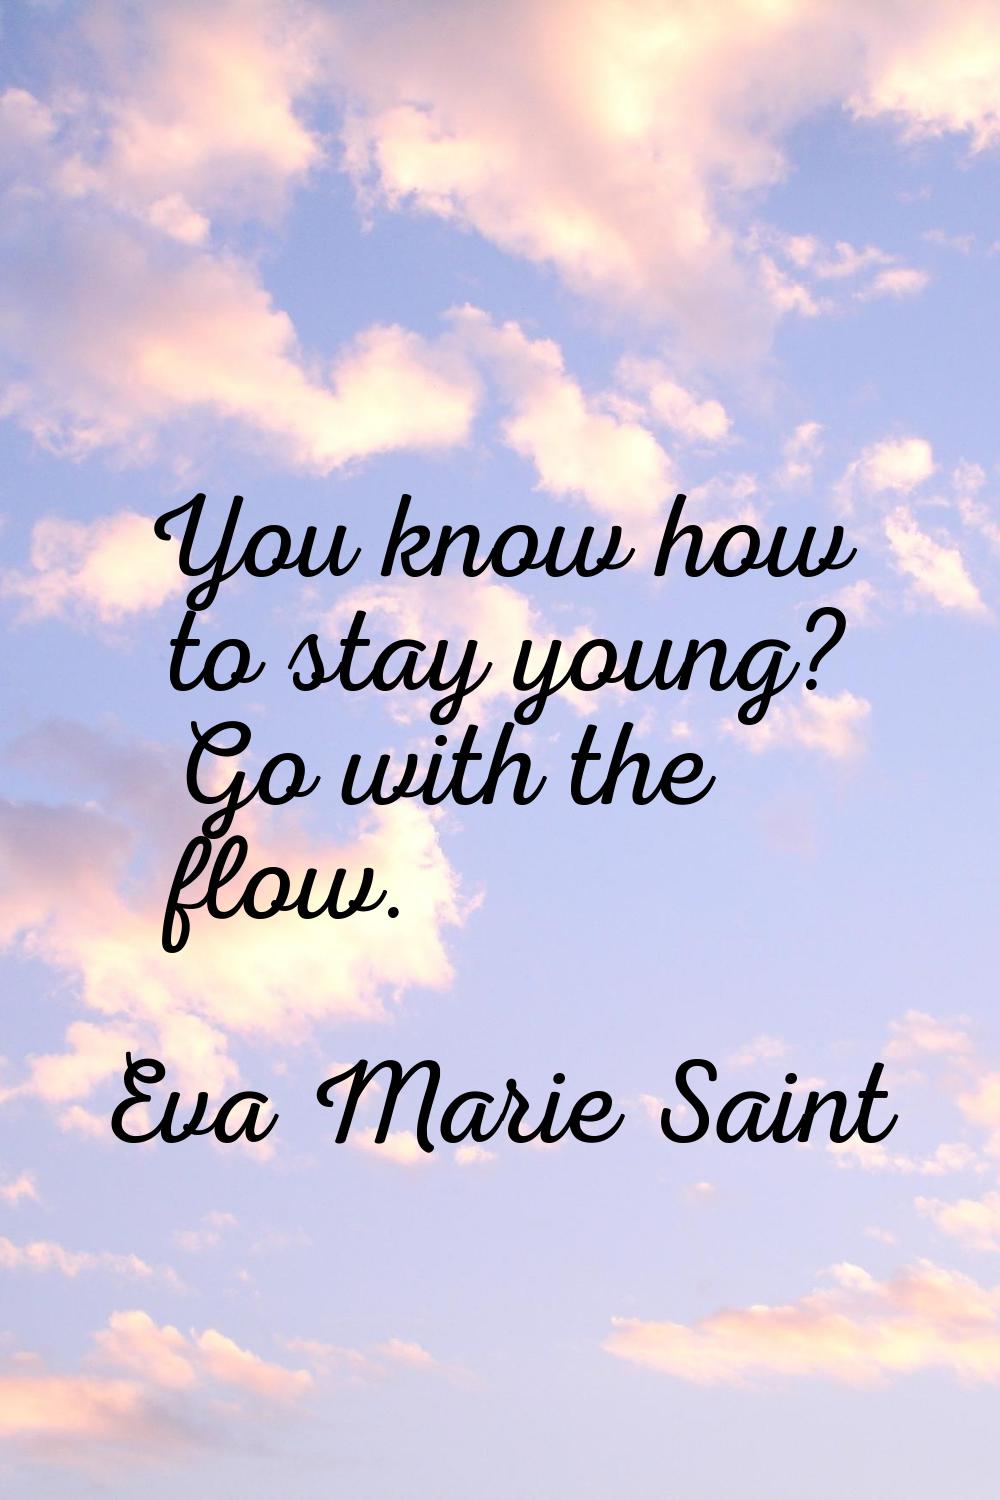 You know how to stay young? Go with the flow.